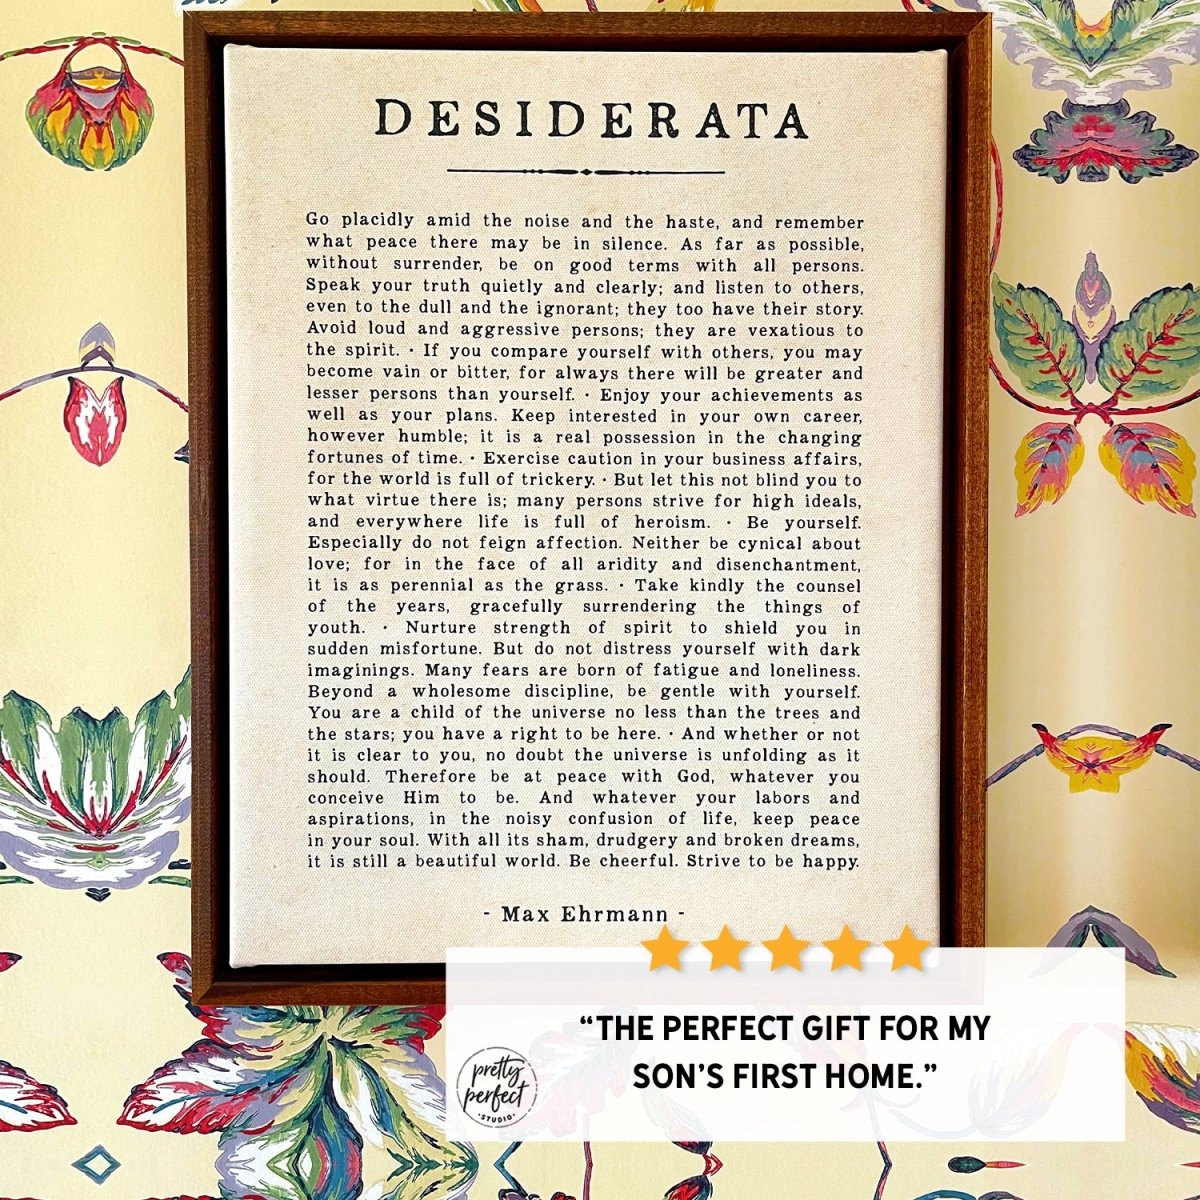 Customer product review for desiderata wall art by Pretty Perfect Studio